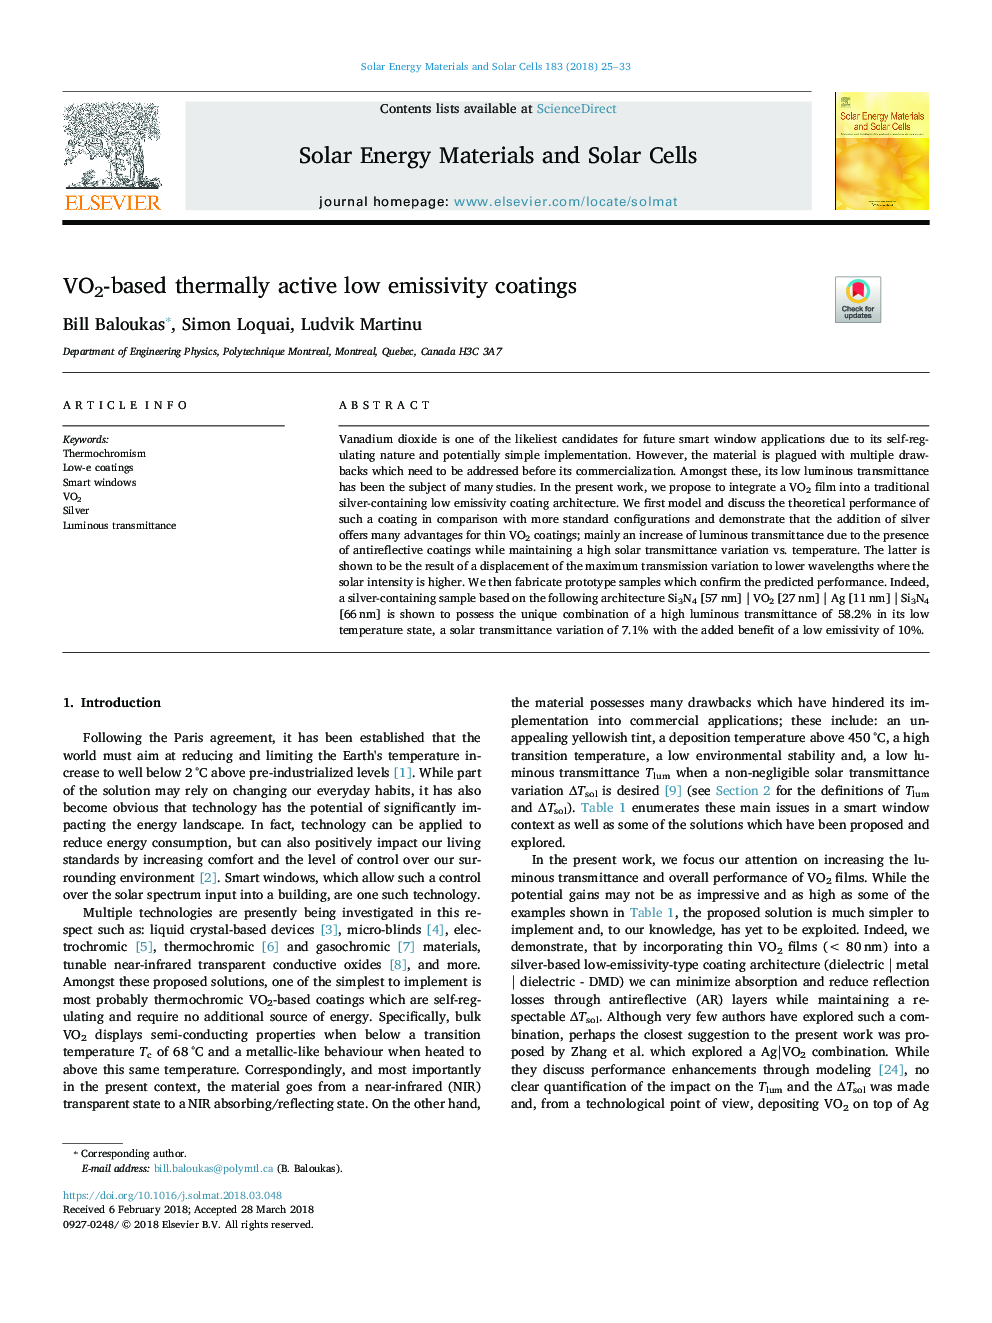 VO2-based thermally active low emissivity coatings